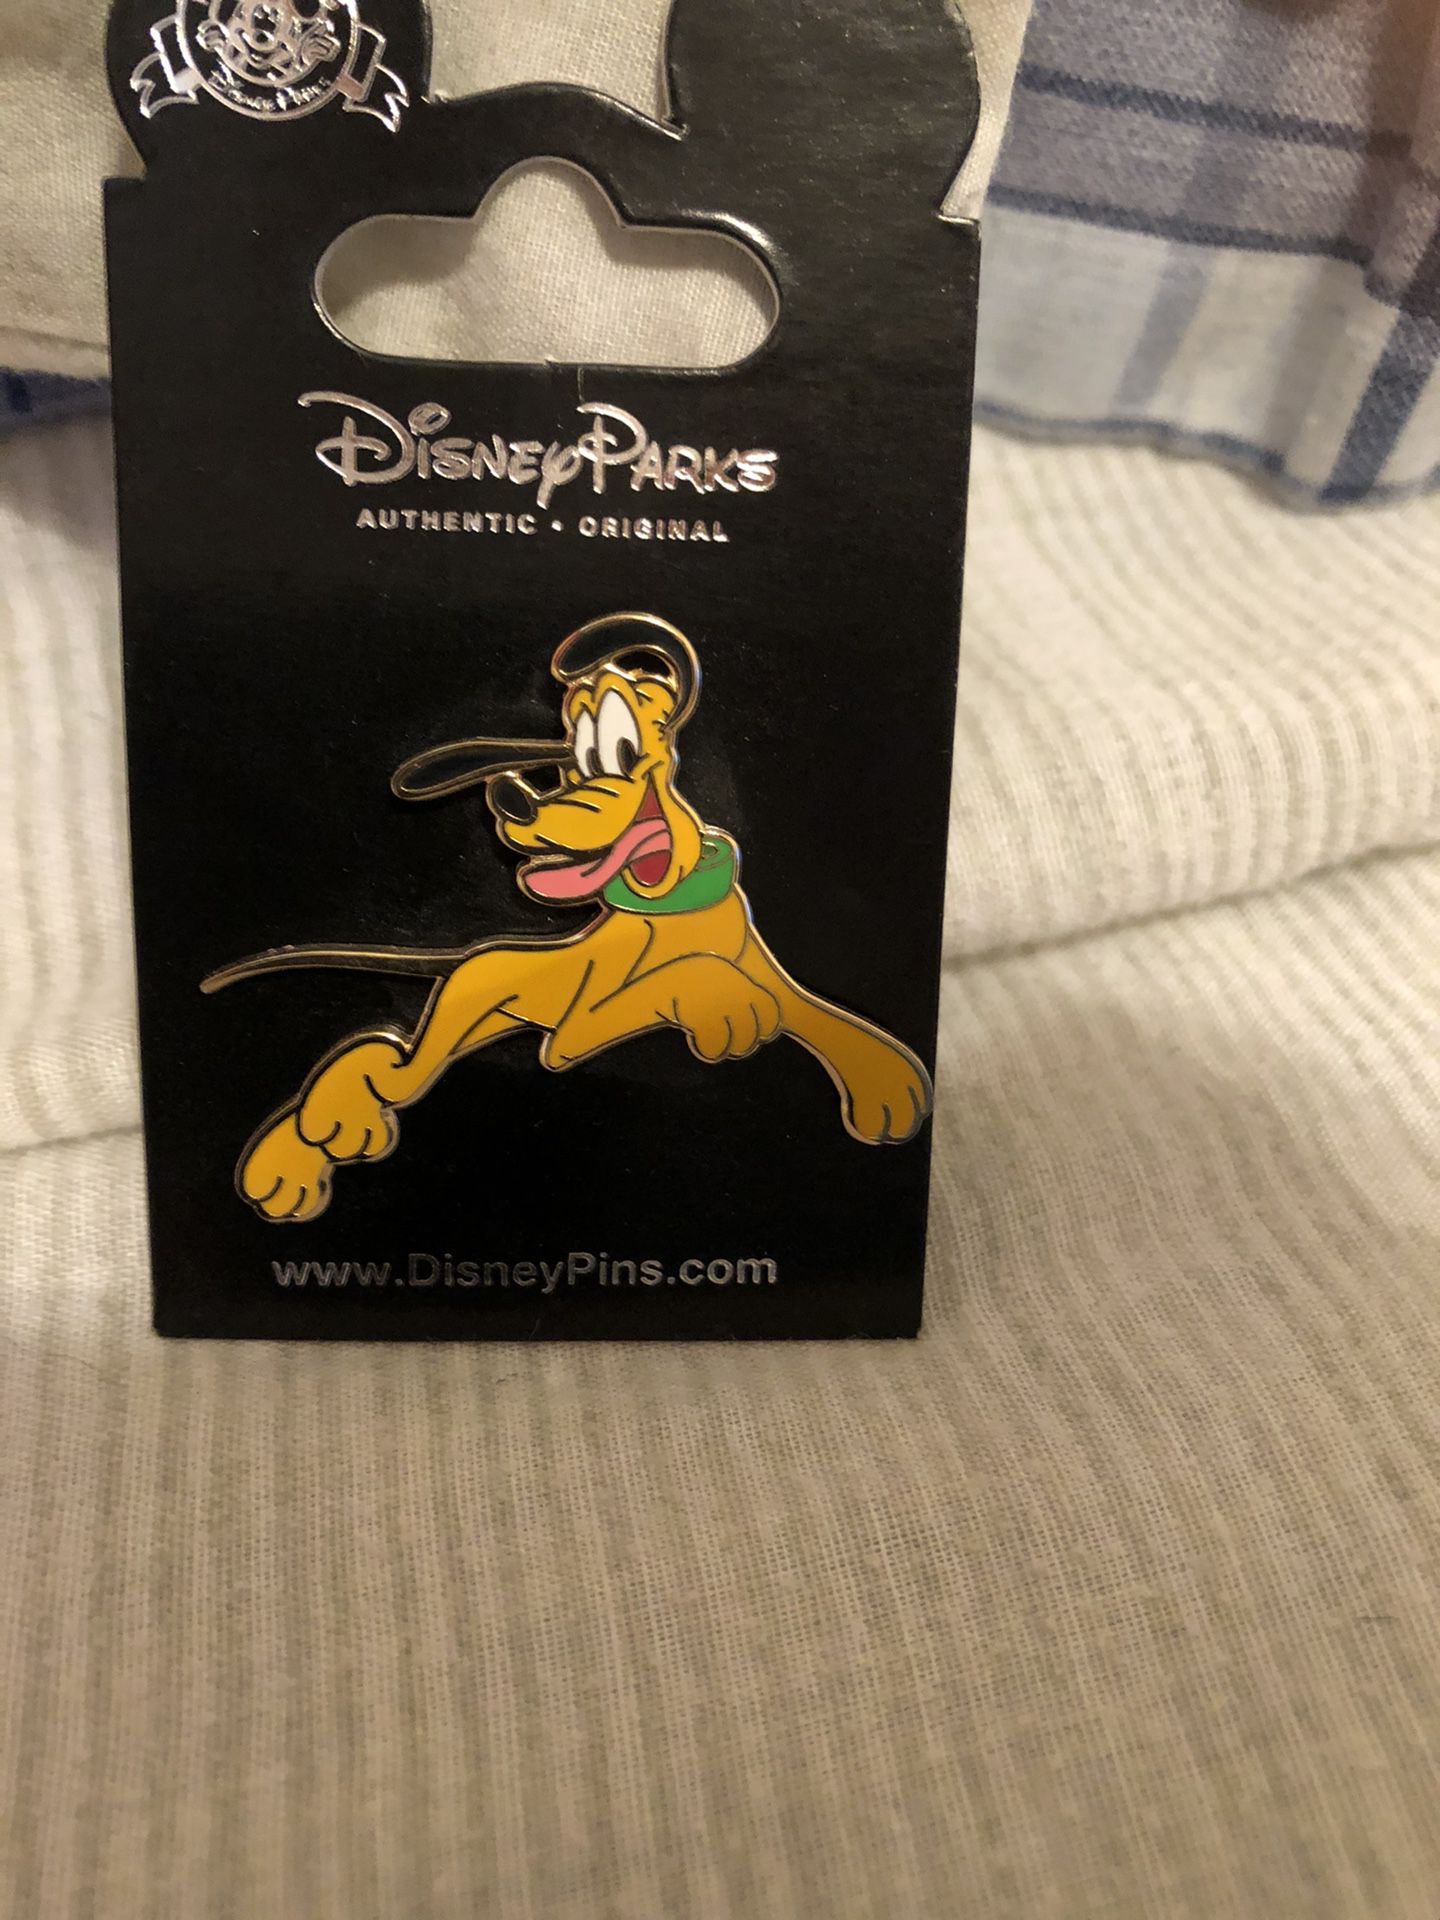 Disney’s Pluto authentic collectors edition pin brand new never used or removed from original packaging